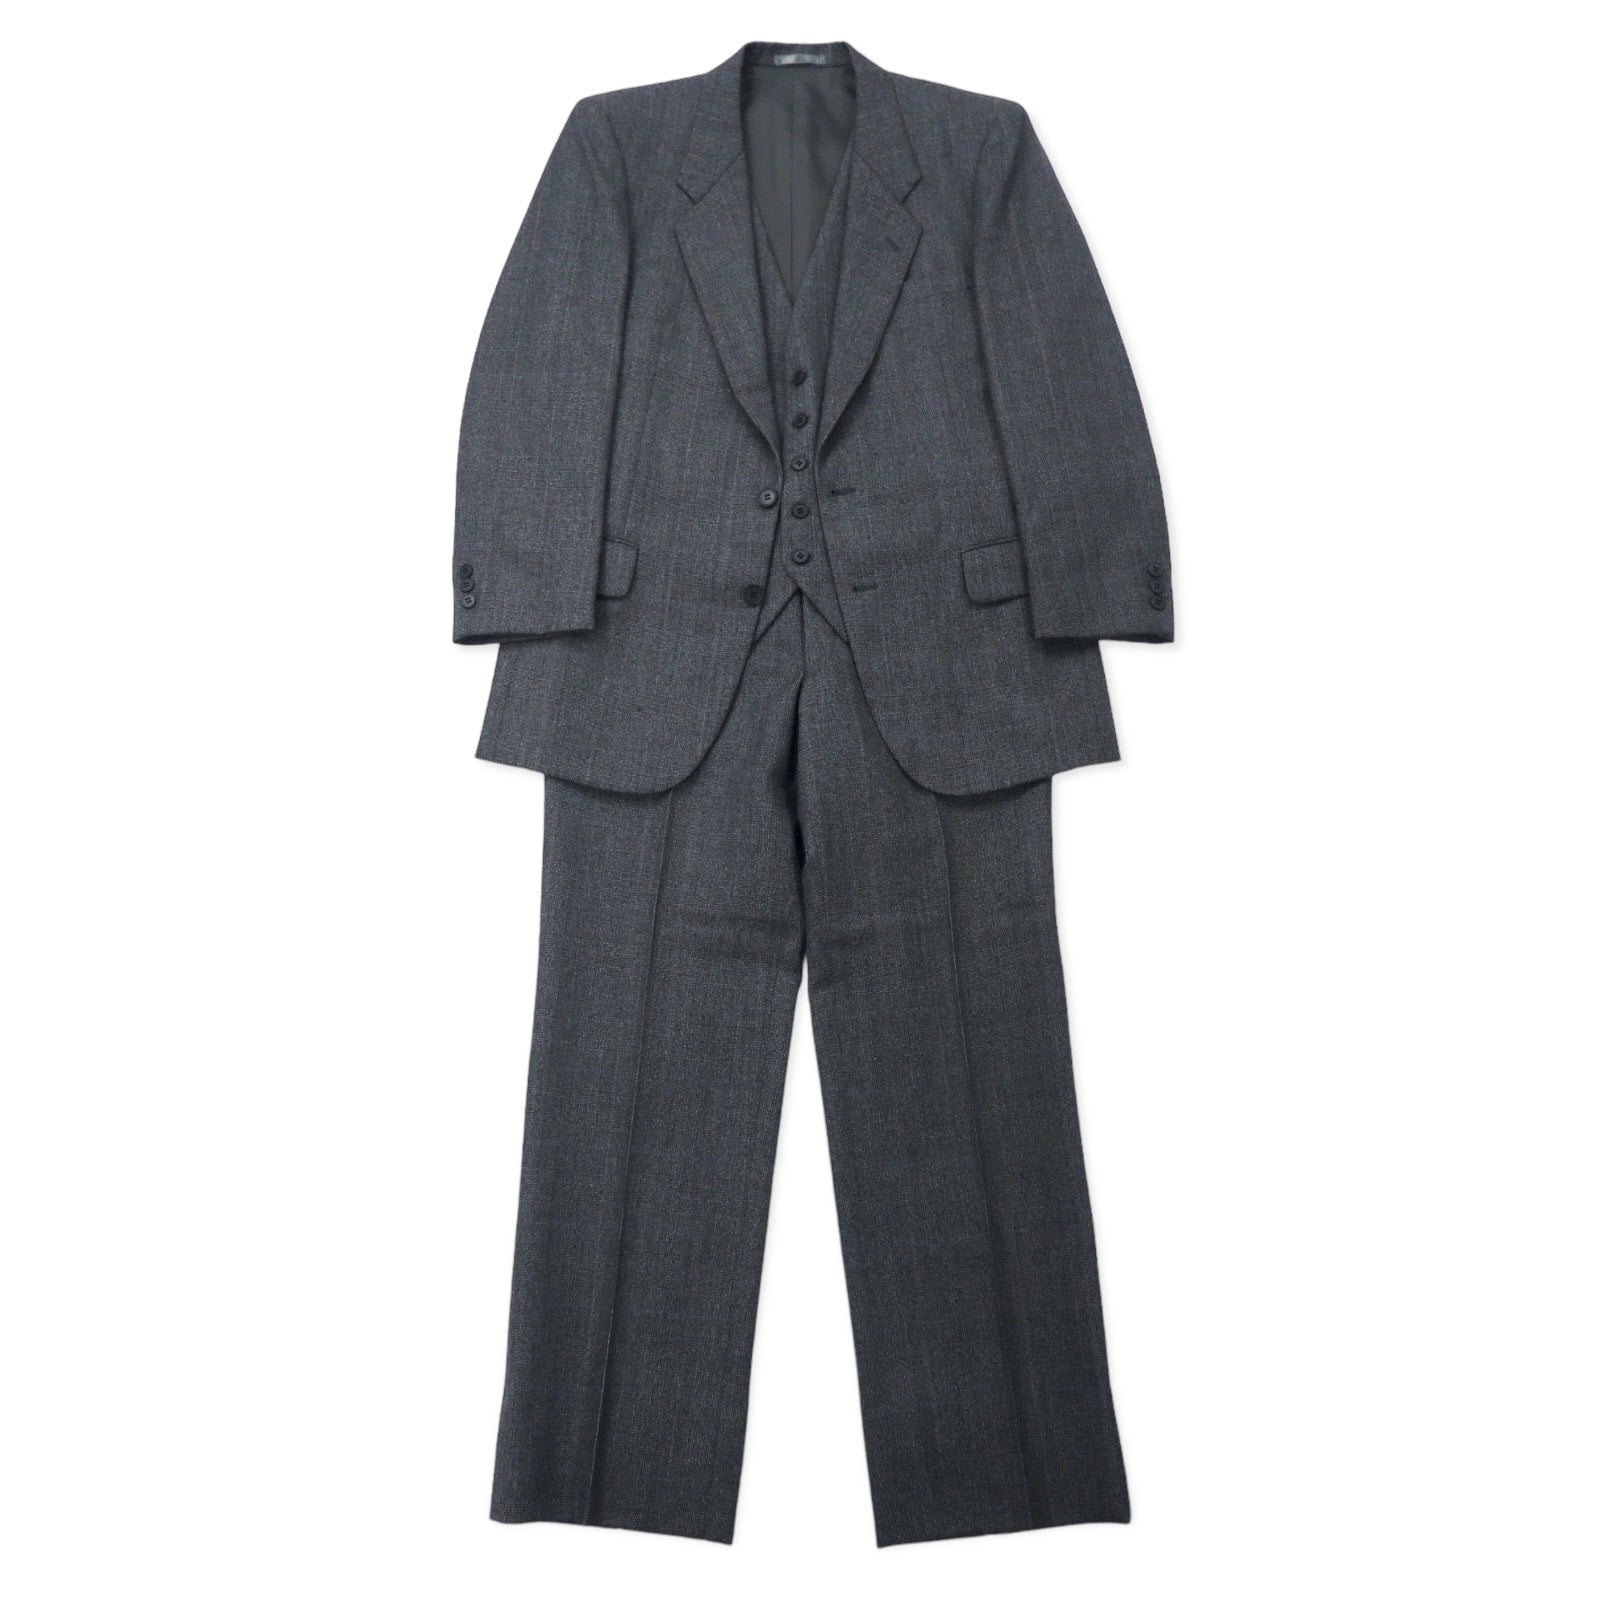 British American Silhouette 3 Piece Suit Setup 96-84-175 A6 Gray 